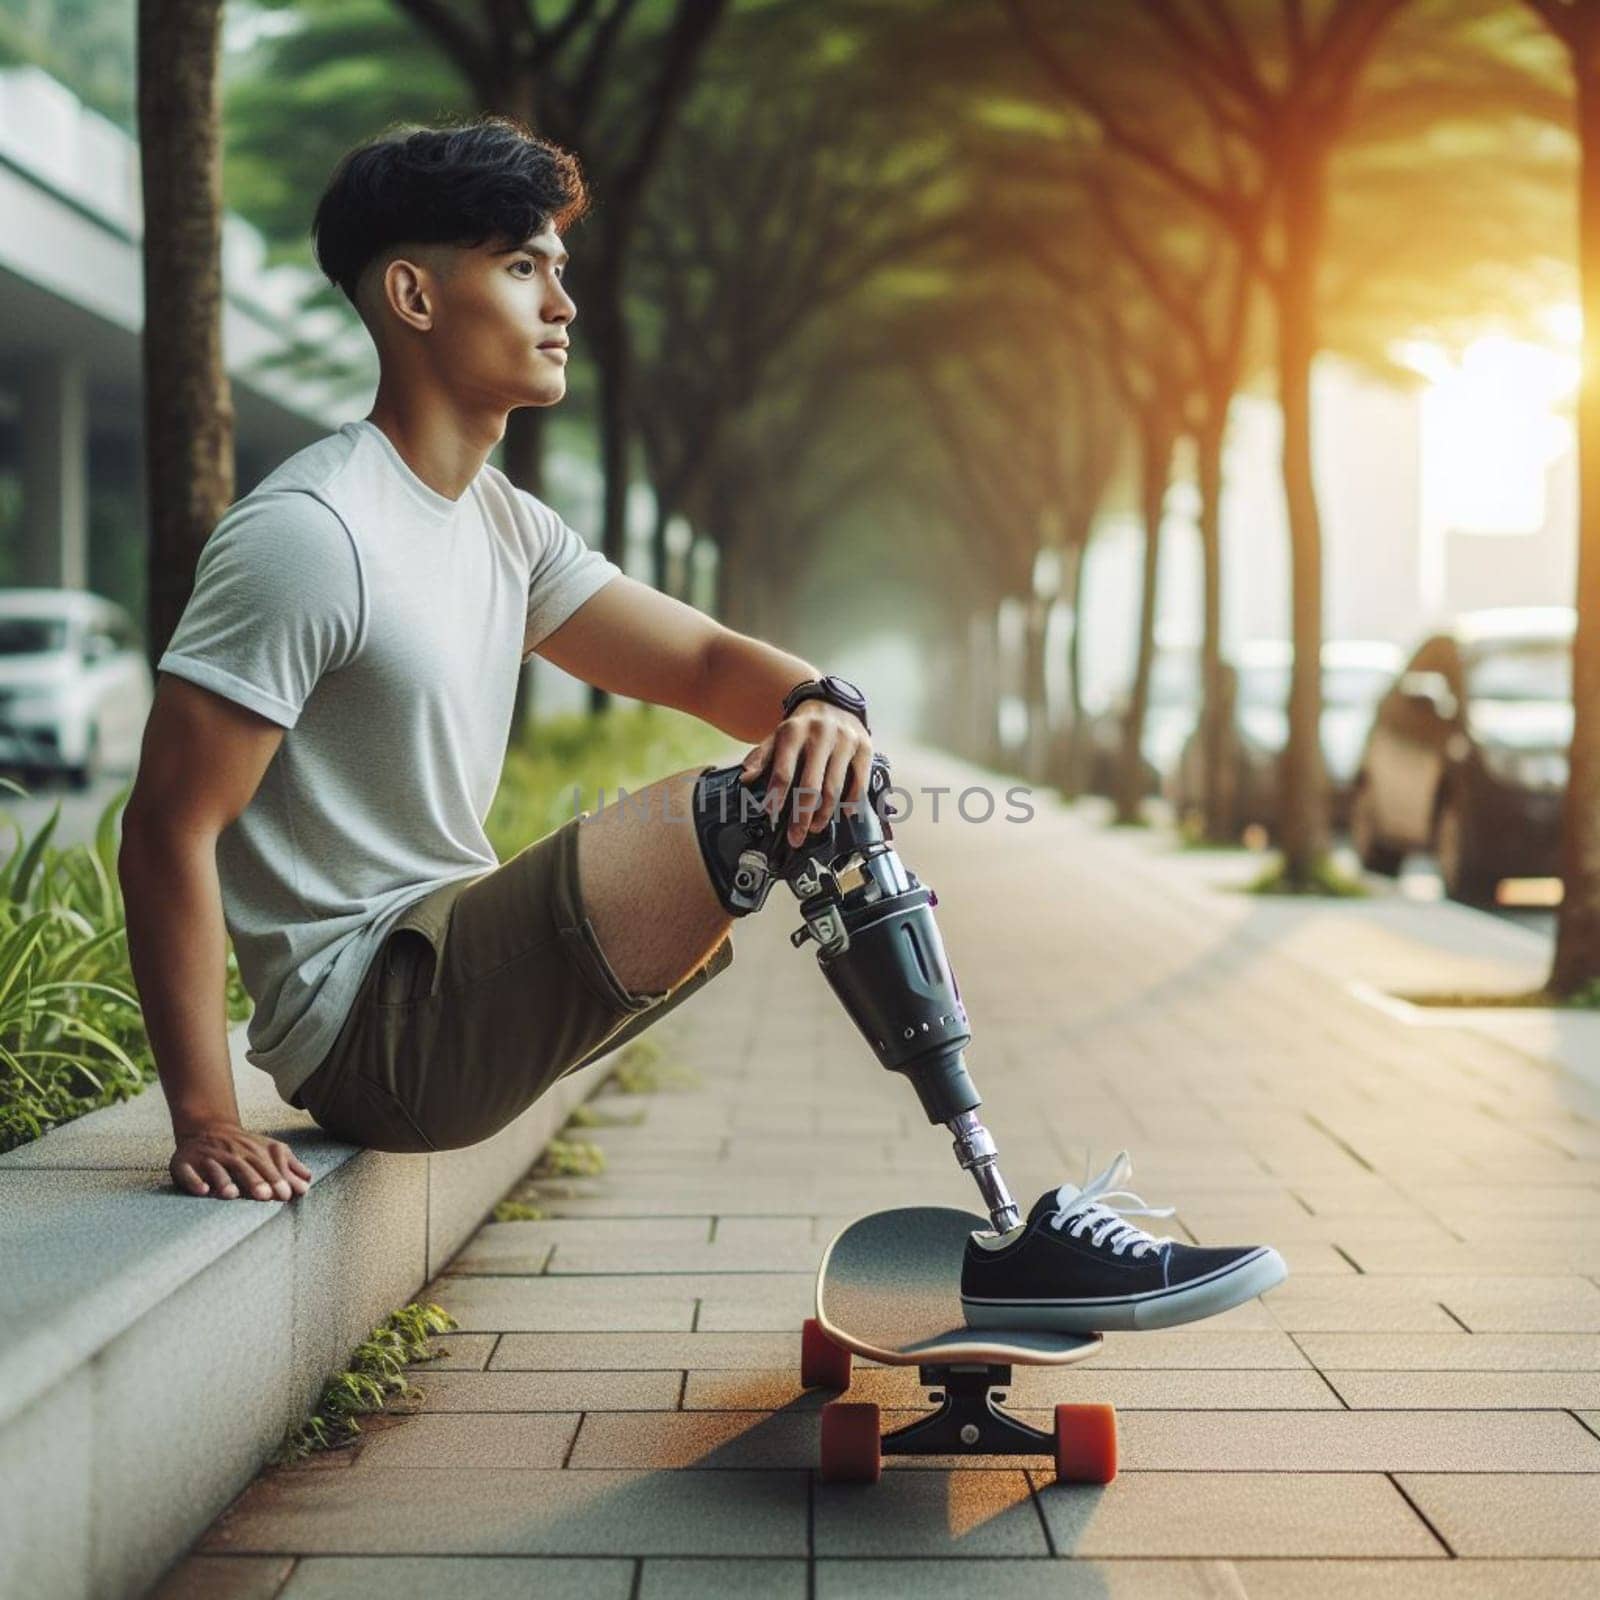 A man with a prosthetic leg is skateboarding down a sidewalk at sunset in a city setting by verbano